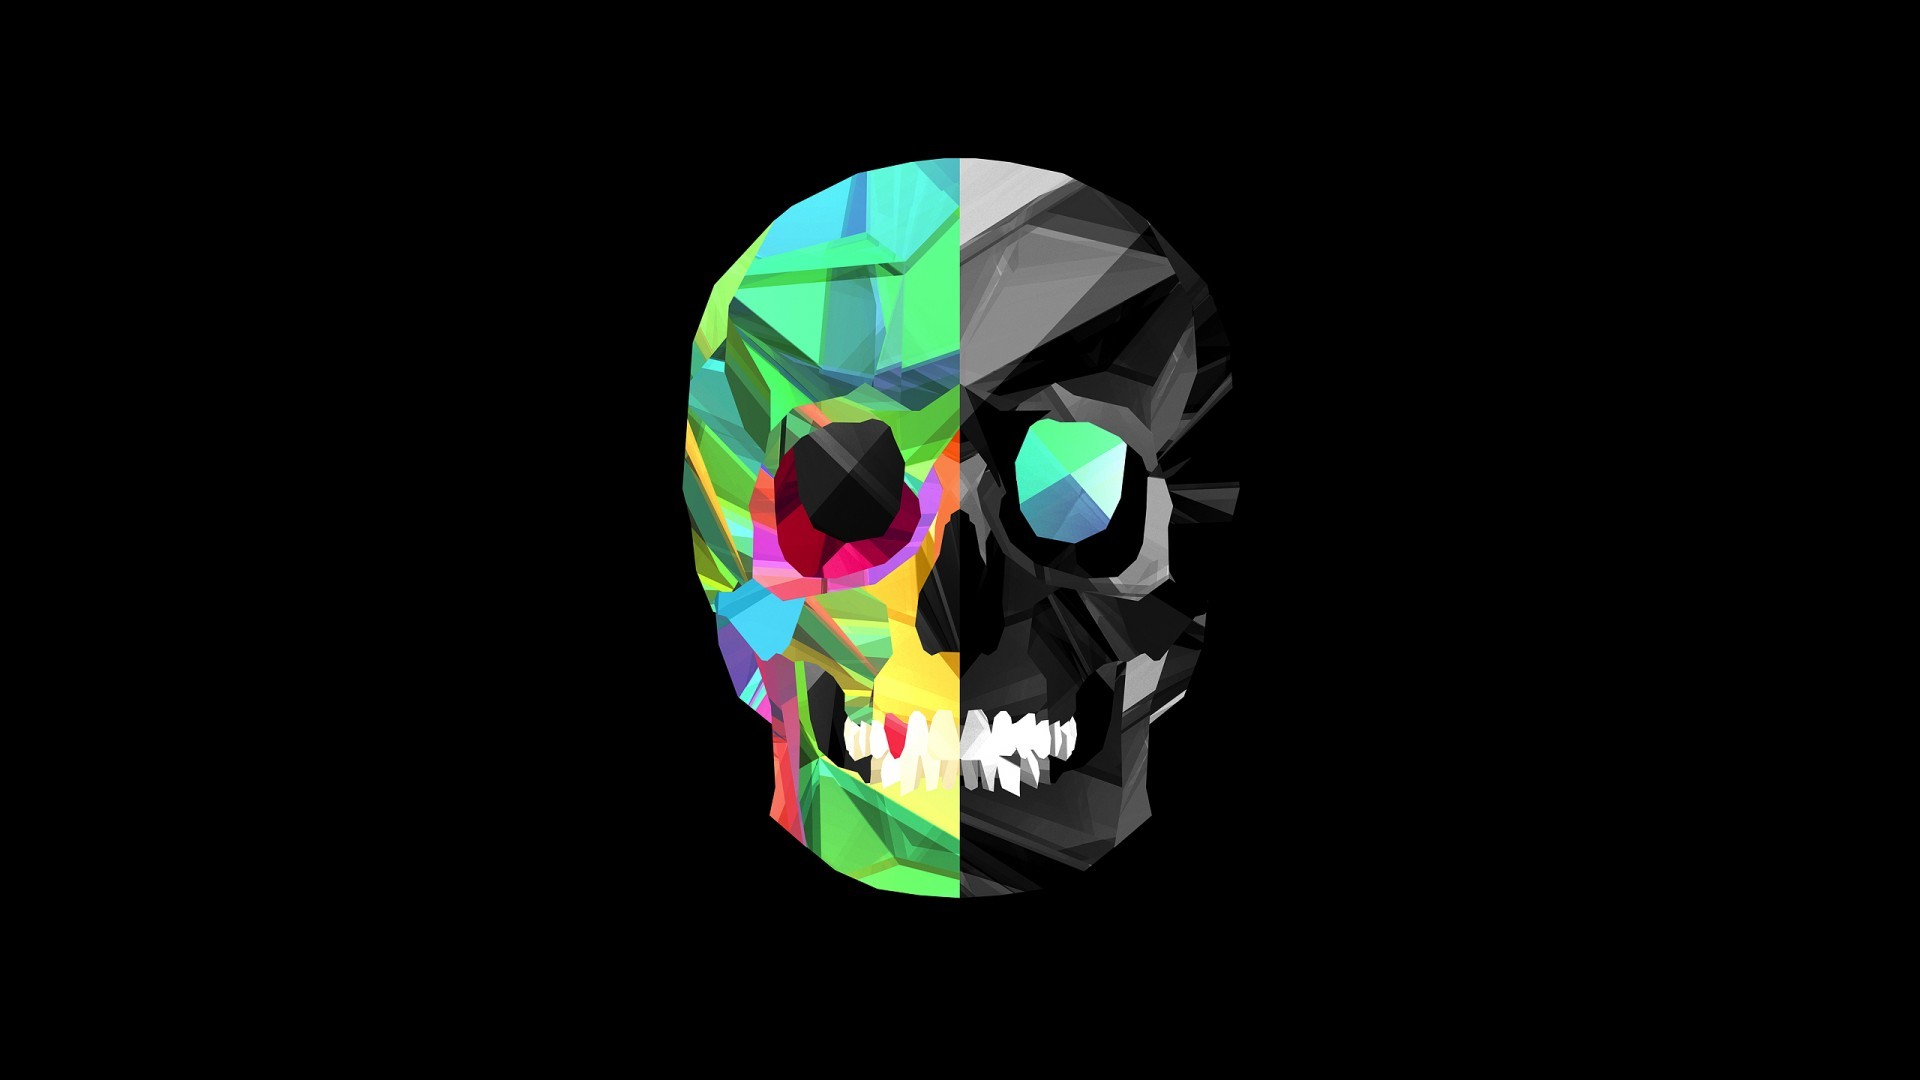 Amazing Skull Wallpapers HD by Syed Hussain